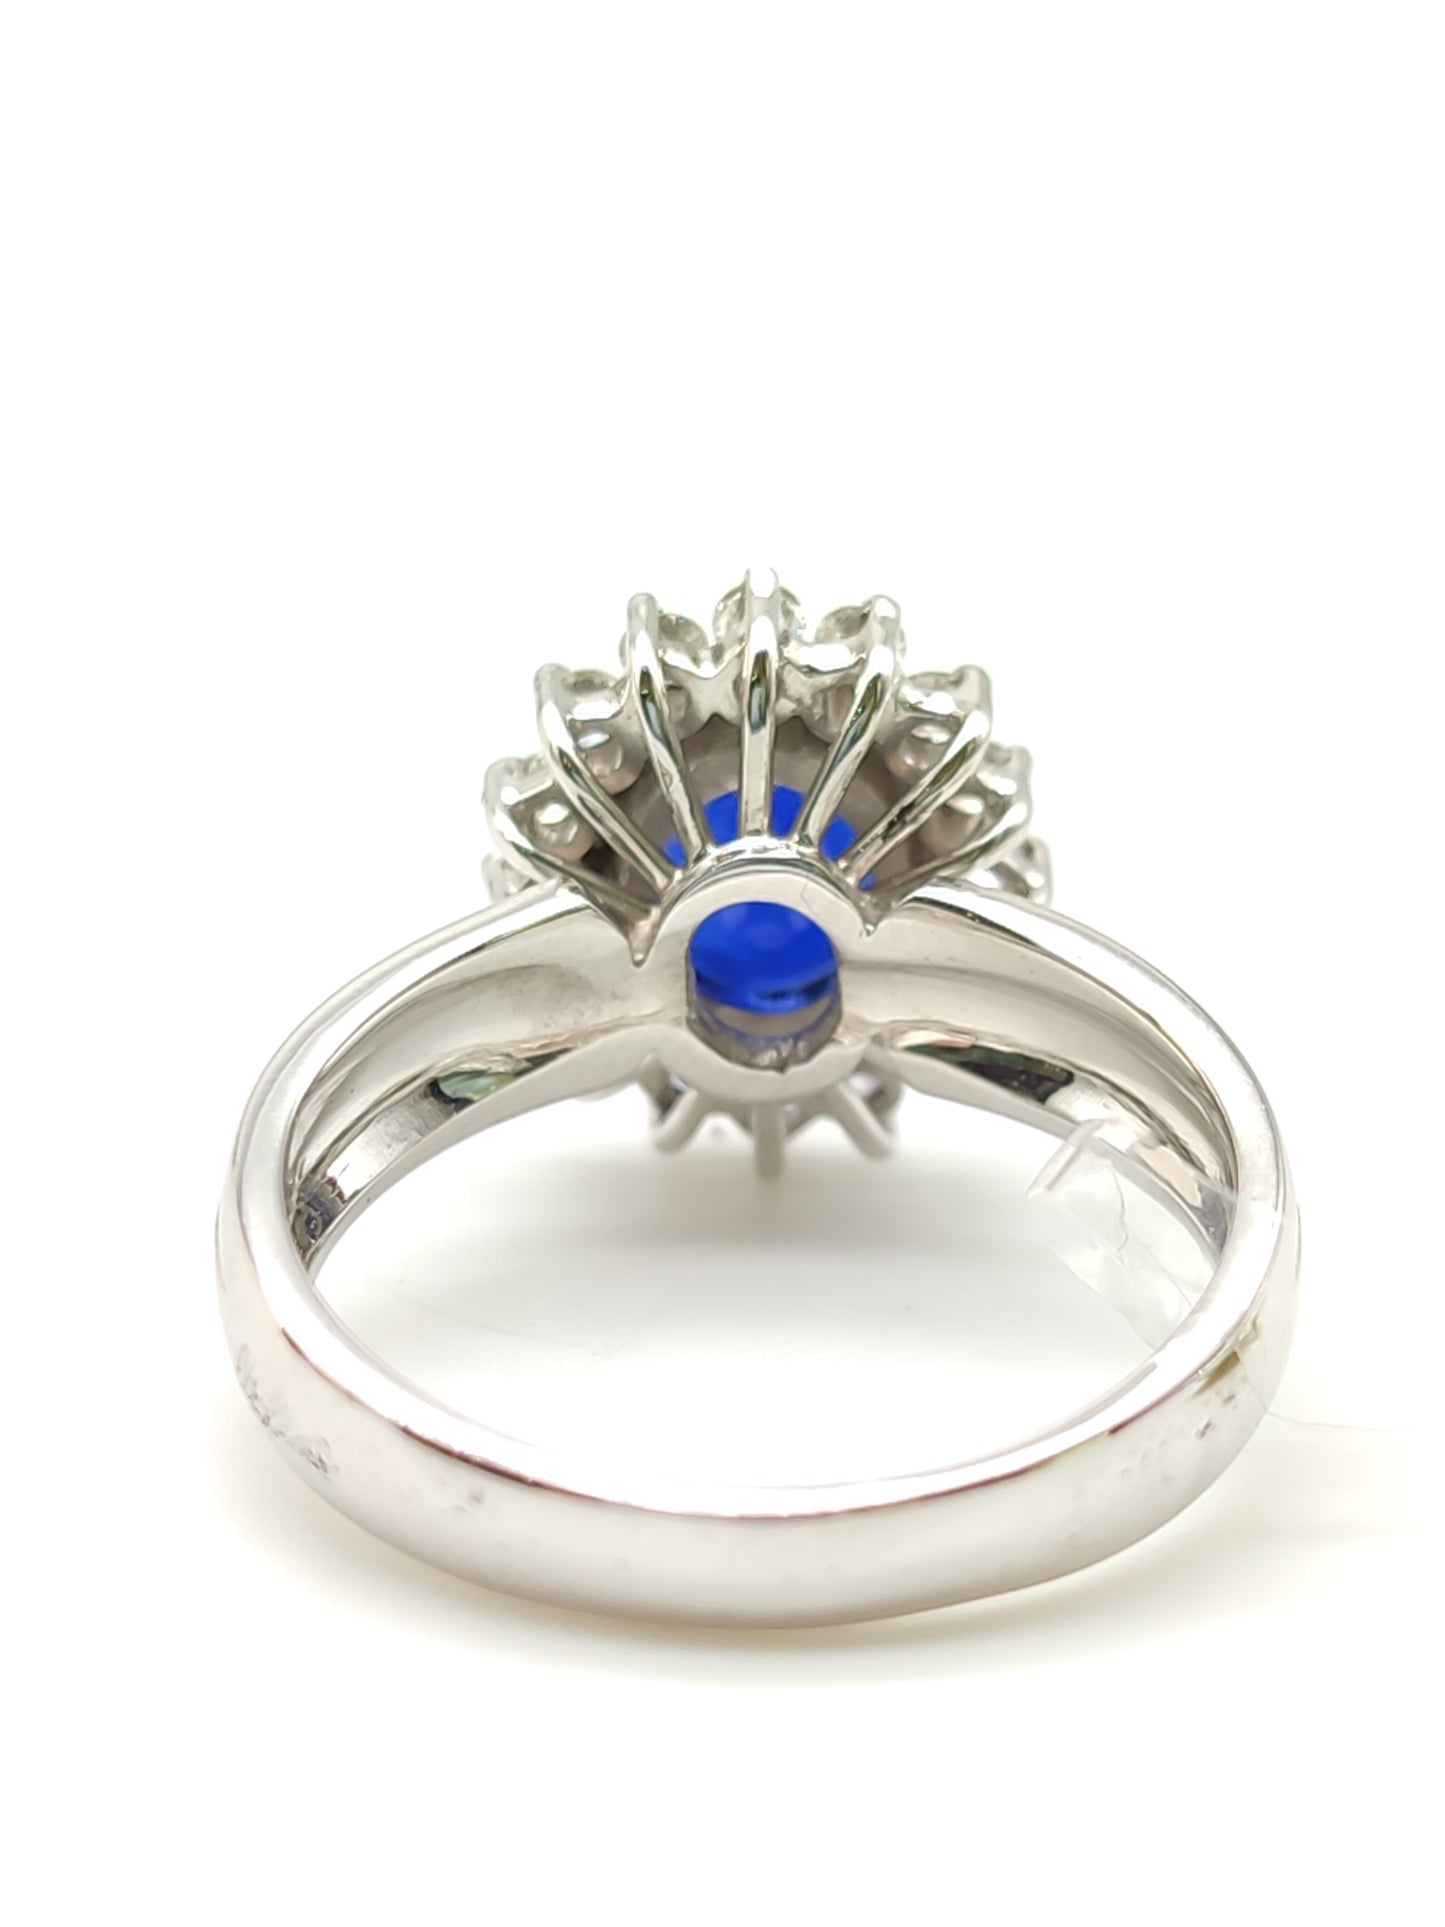 Gold ring with blue sapphire and diamonds